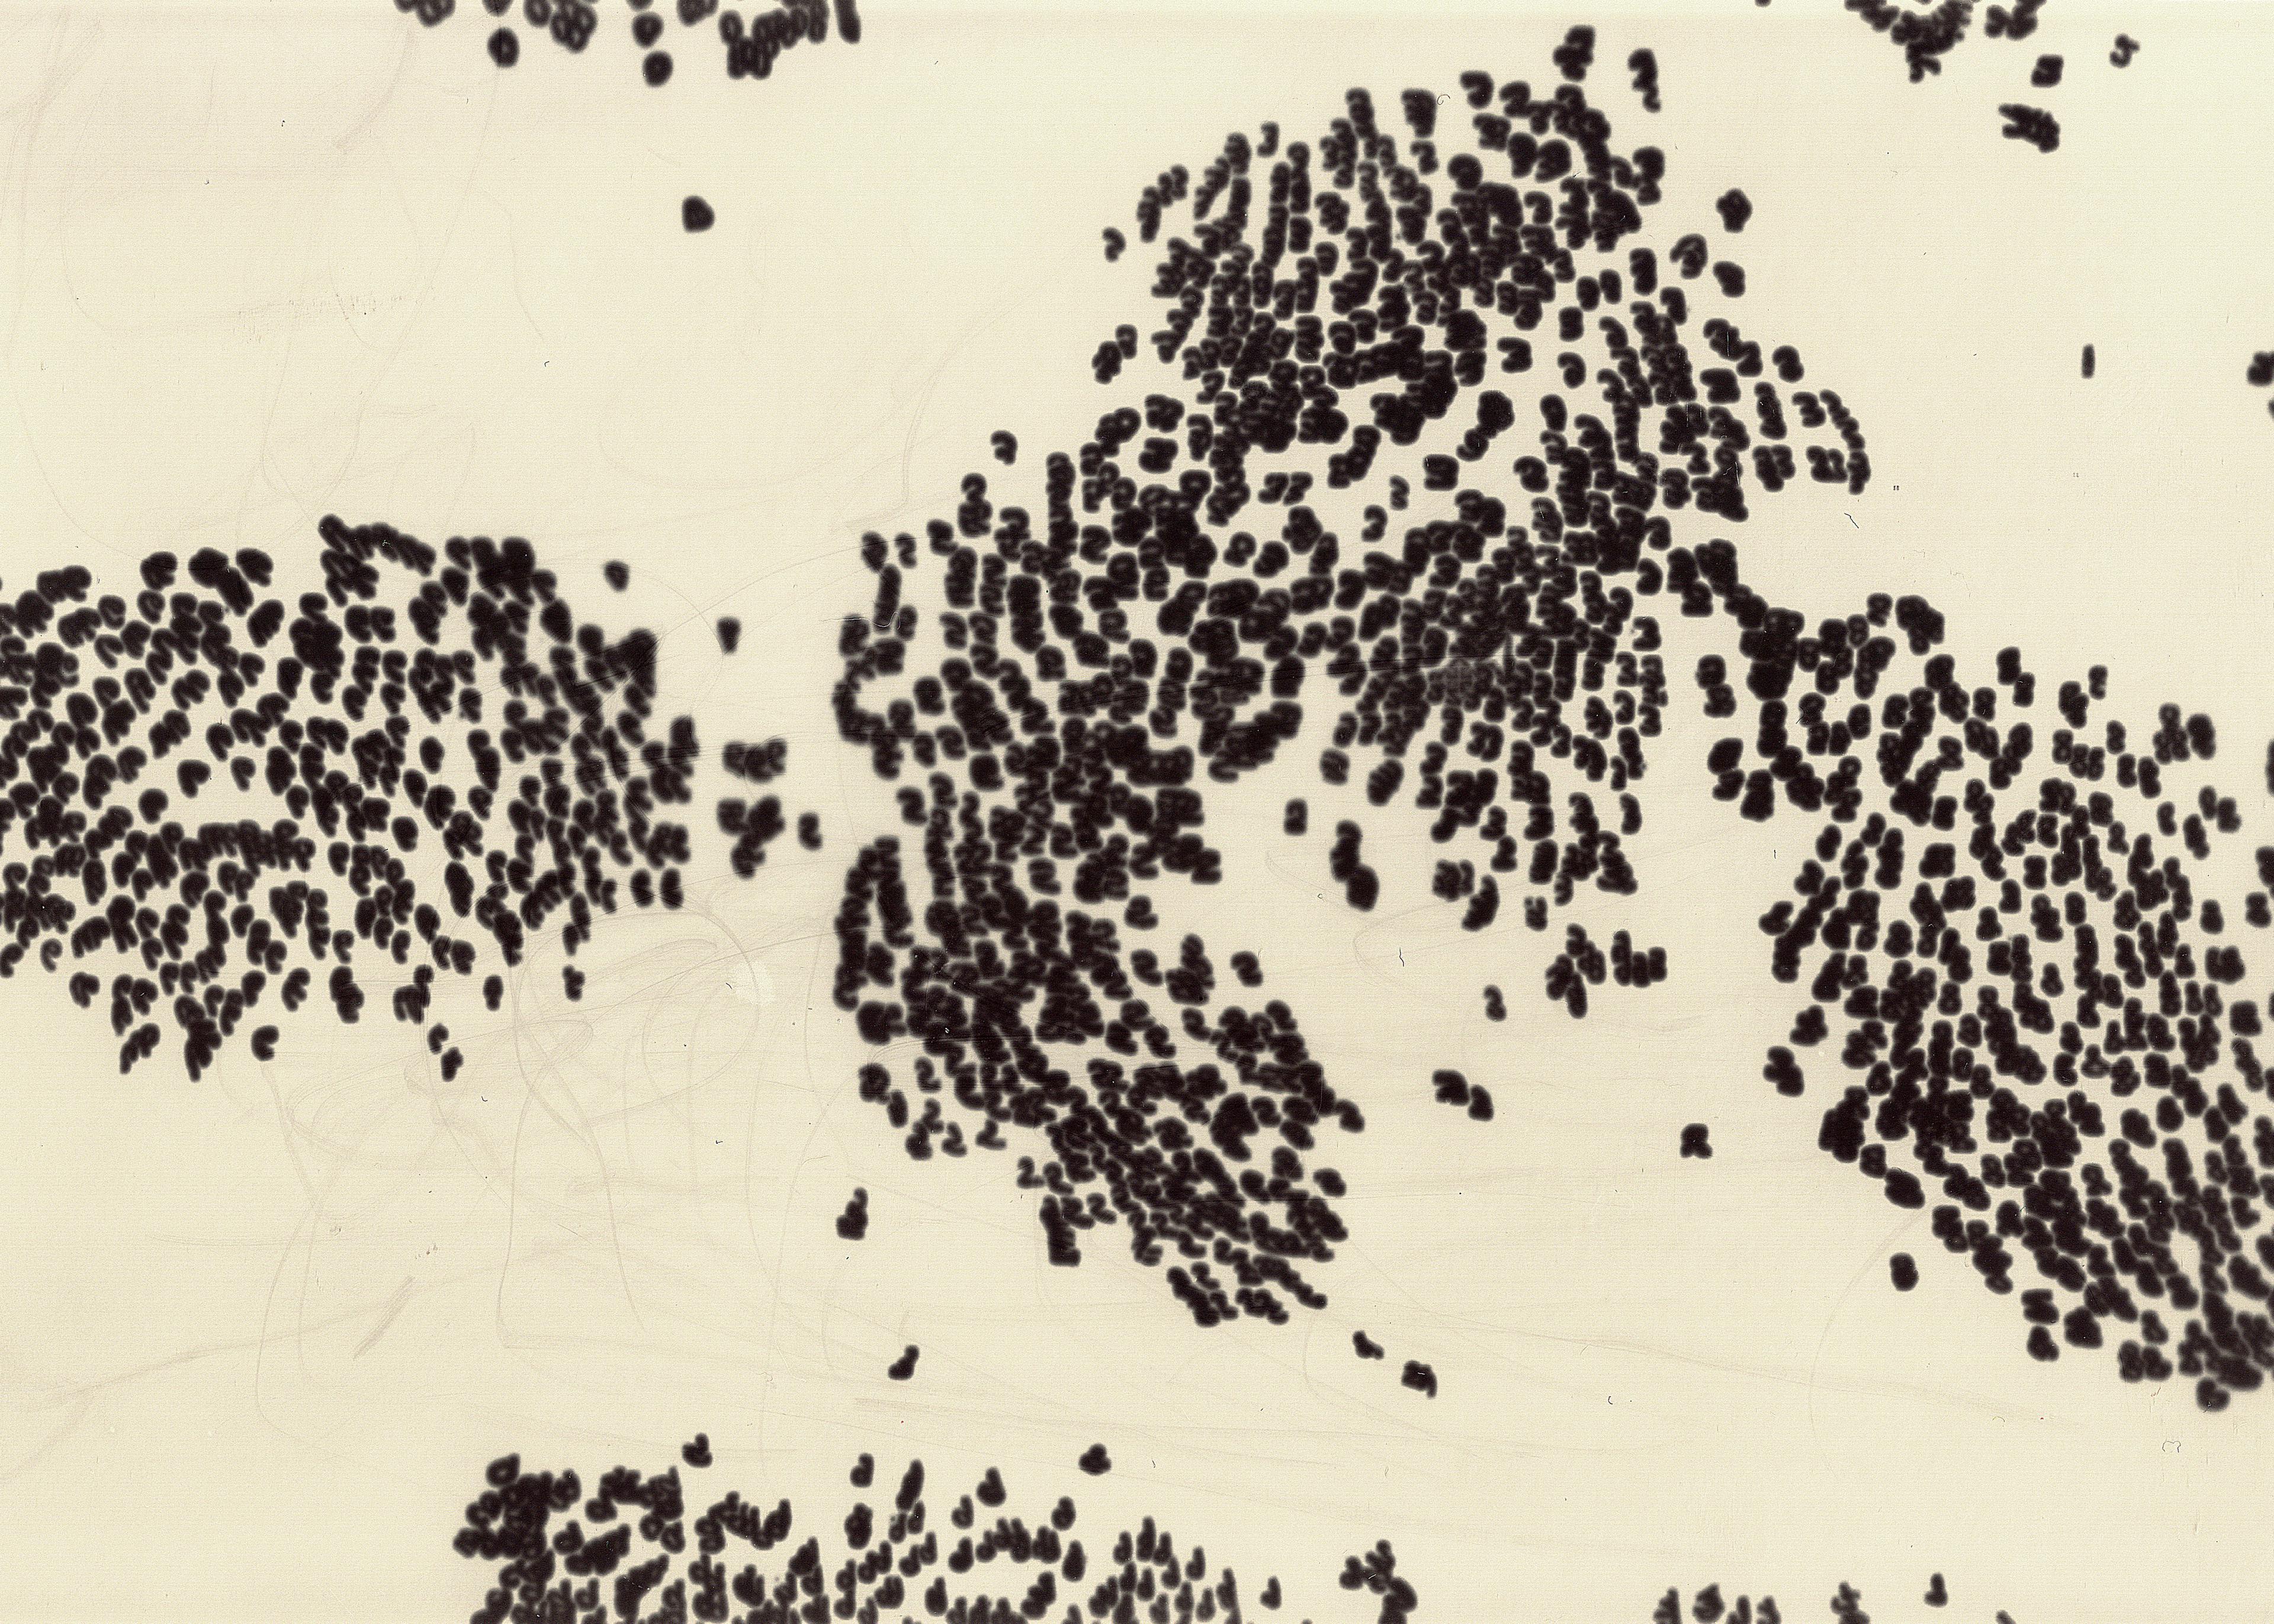 A laptopogram displaying a dataset as cloud-like clusters of black blobs on a neutral background. There are three larger collections, almost resembling a map, with some data points leaking out into the negative space.